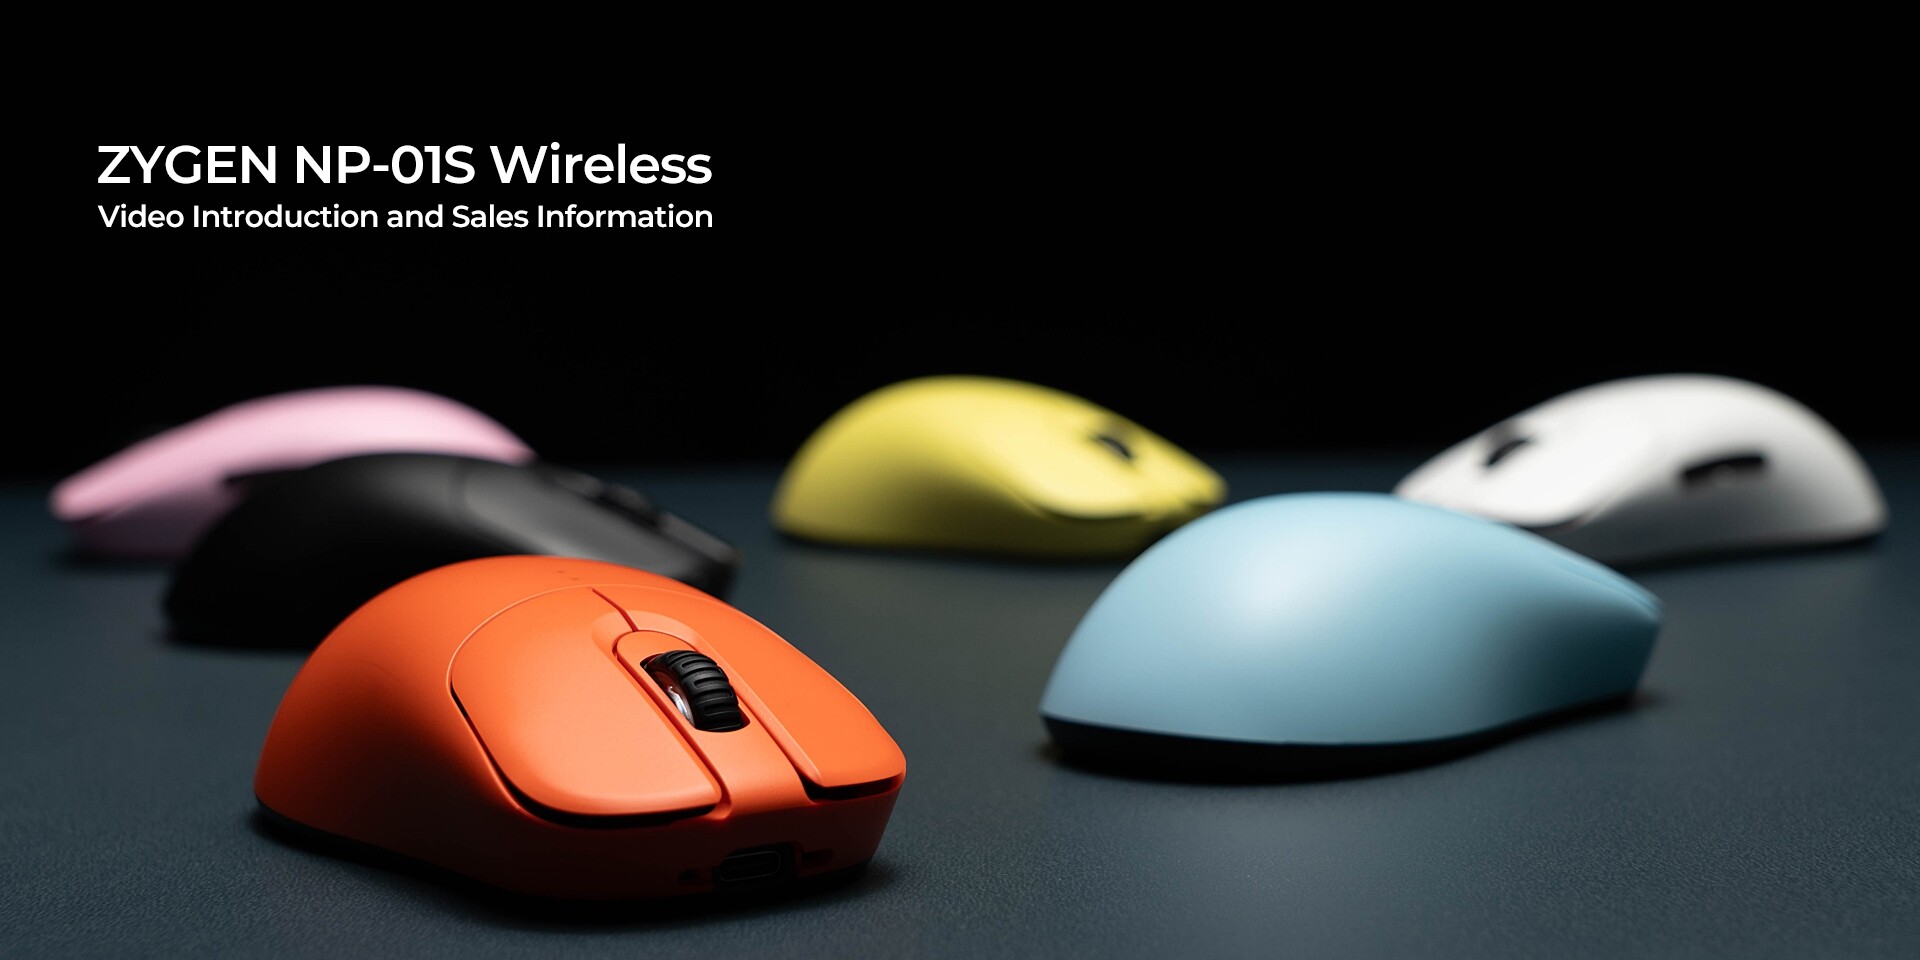 VAXEE Introduces ZYGEN NP-01S Wireless Gaming Mouse | TechPowerUp